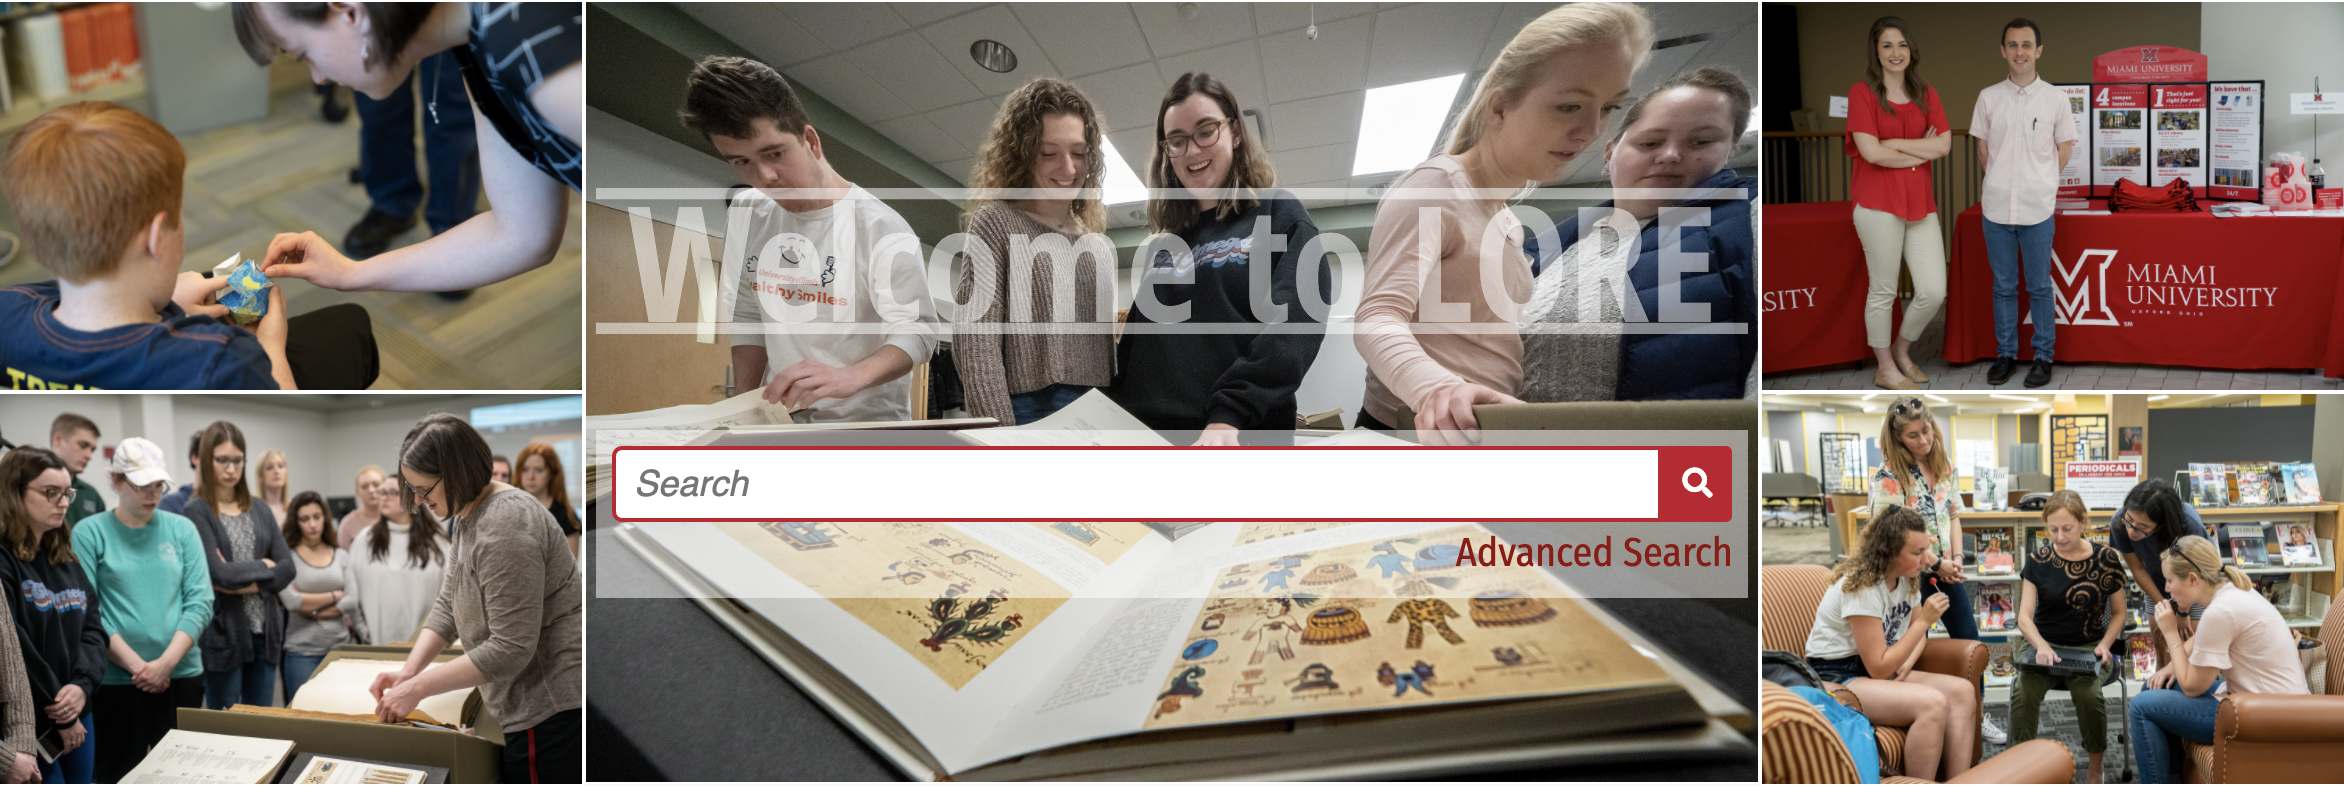 A screenshot of the header for the Learning Object Repository webpage, which features five photographs depicting students and librarians, the text Welcome to LORE, a search bar, and a link to Advanced Search.